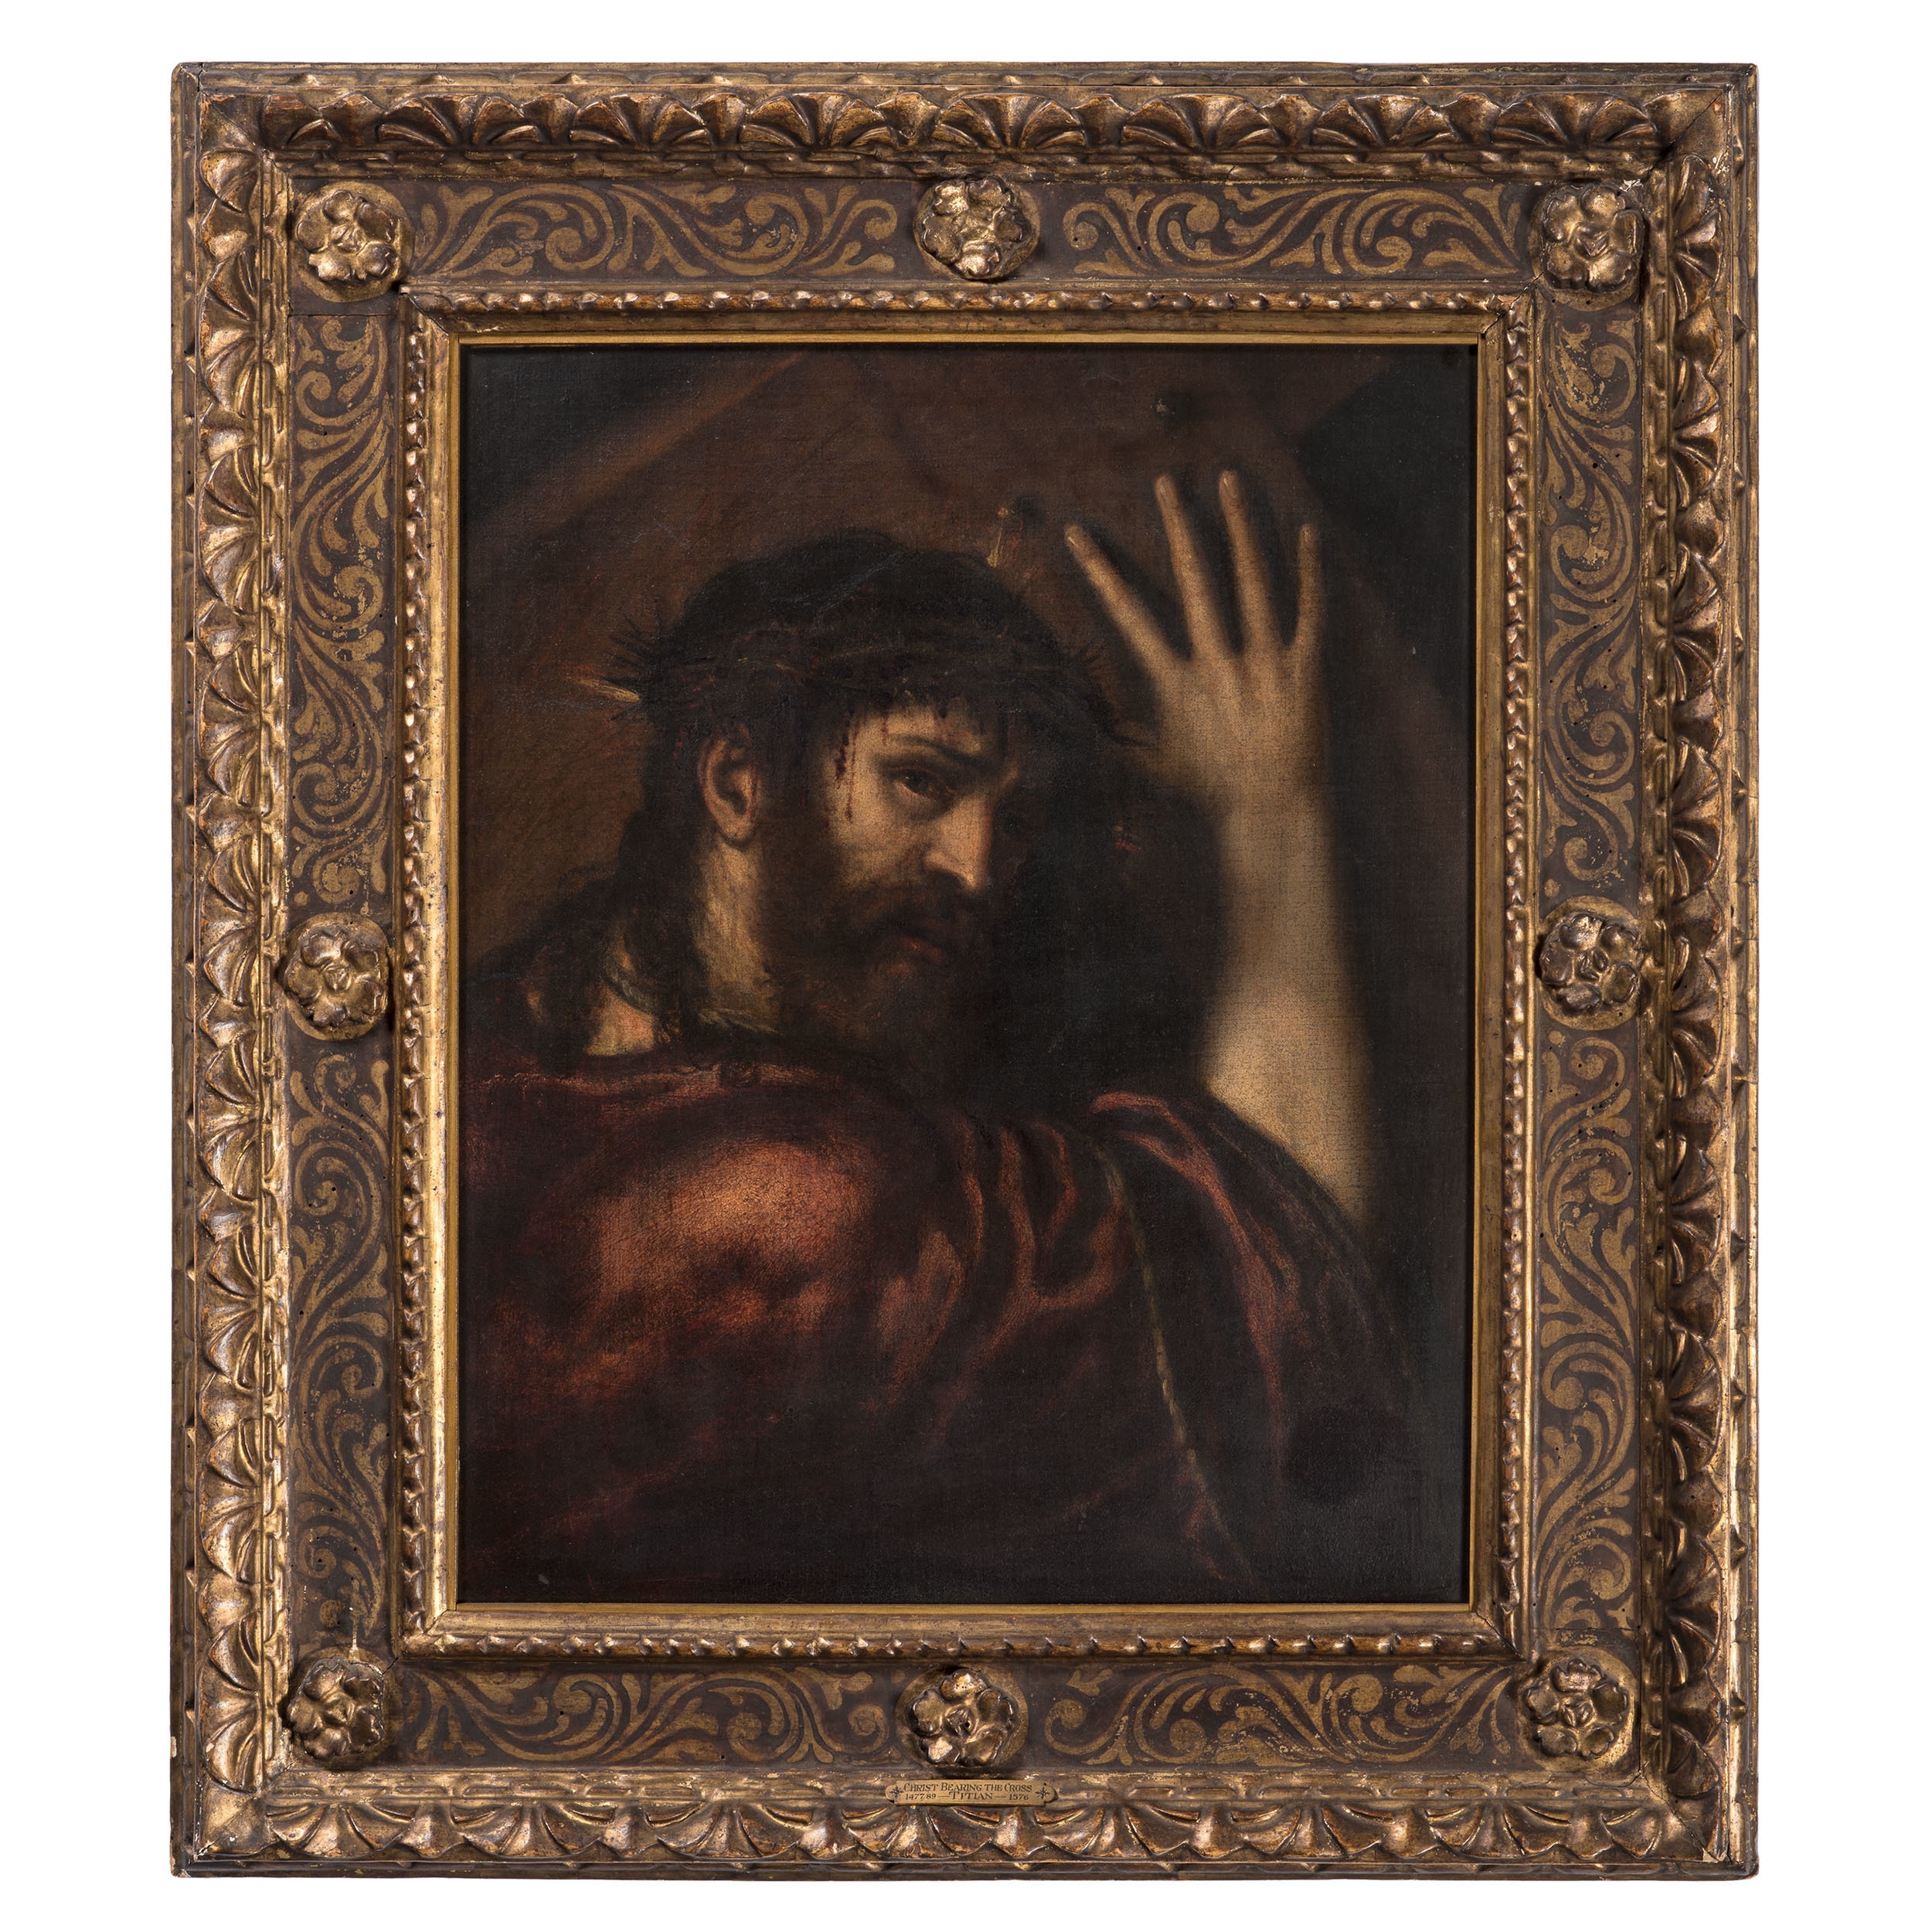 After Titian, Portrait of Christ Carrying the Cross by Titian, 16th century